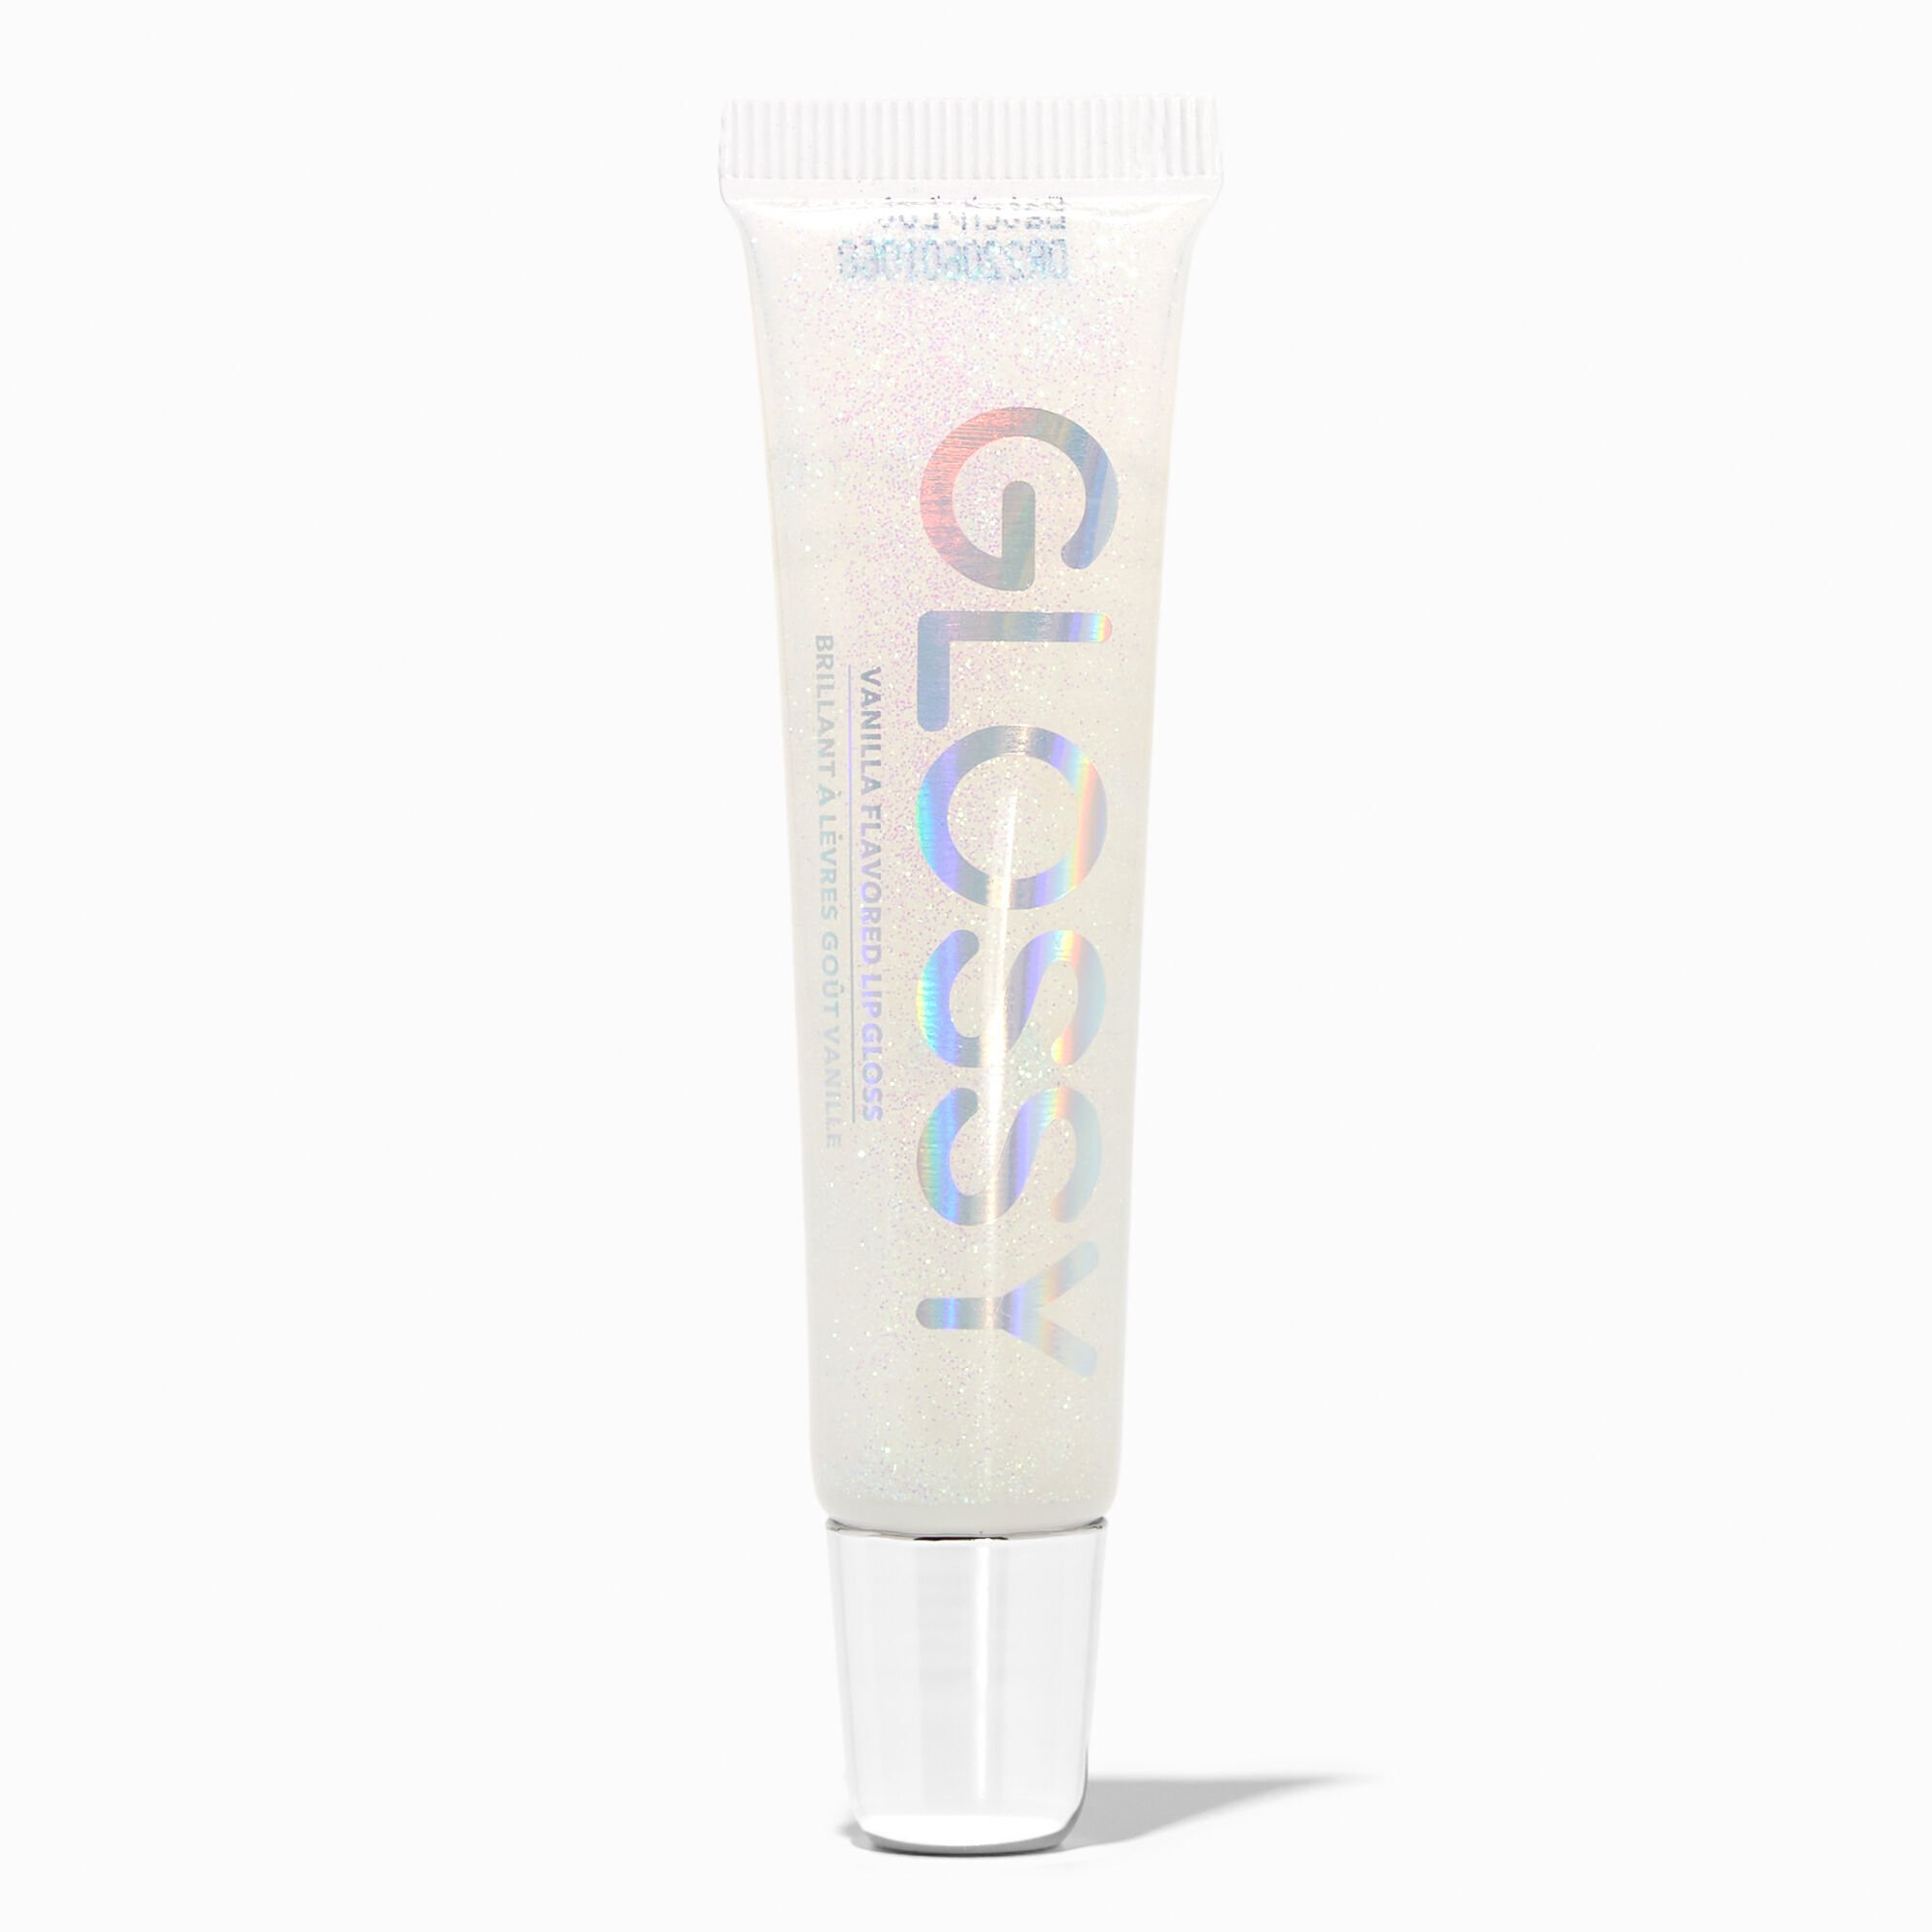 View Claires Glossy Glitter Lip Gloss Clear information